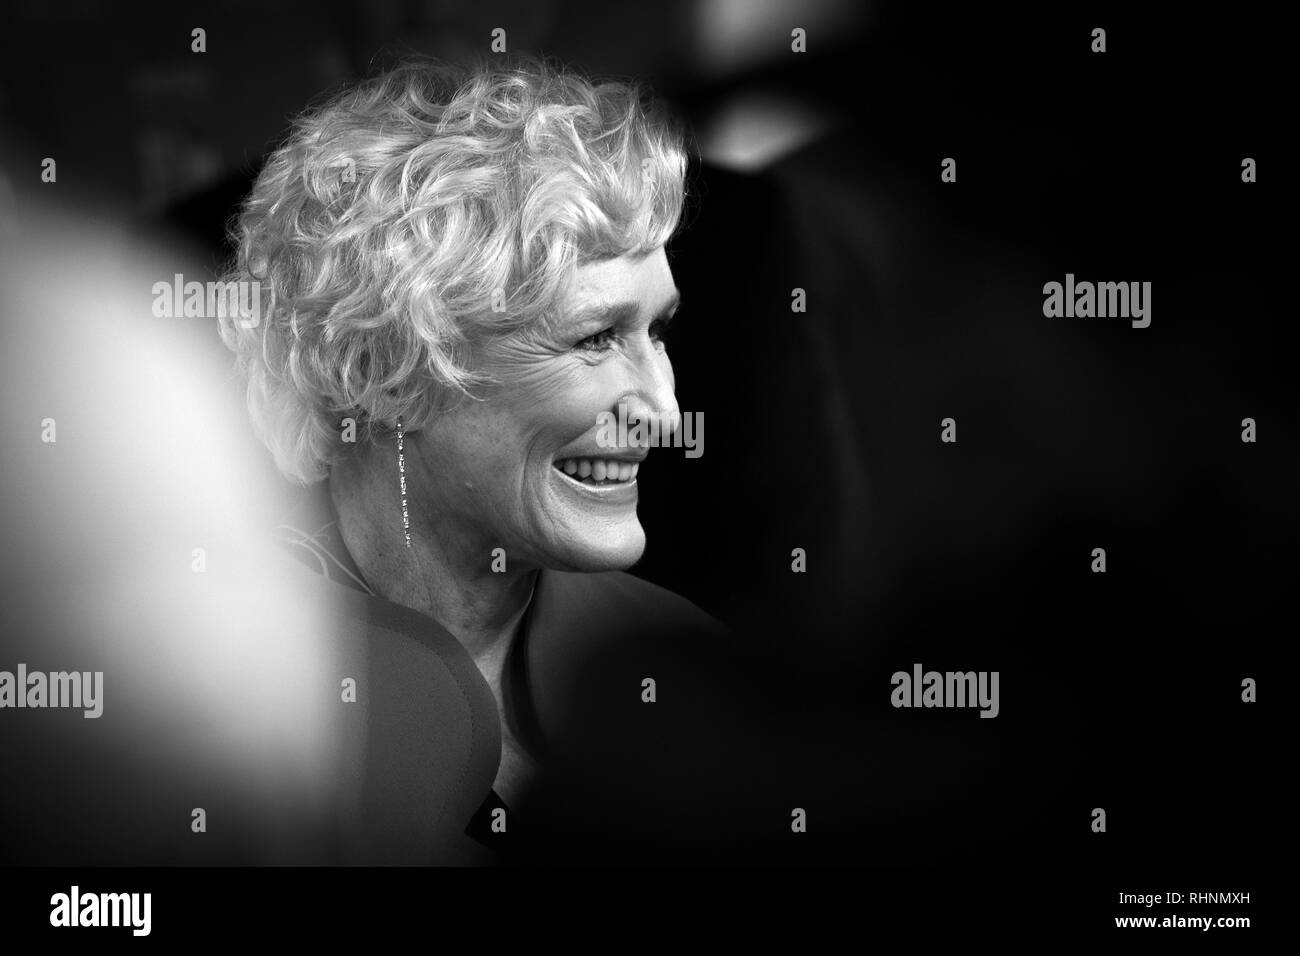 Santa Barbara, California, USA. 3rd Feb, 2019. GLENN CLOSE arrives at the Arlington Theater to receive the Maltin Modern Master Award. The award honors an individual who has enriched our culture through accomplishments in the motion picture industry. Credit: Erick Madrid/ZUMA Wire/Alamy Live News Stock Photo